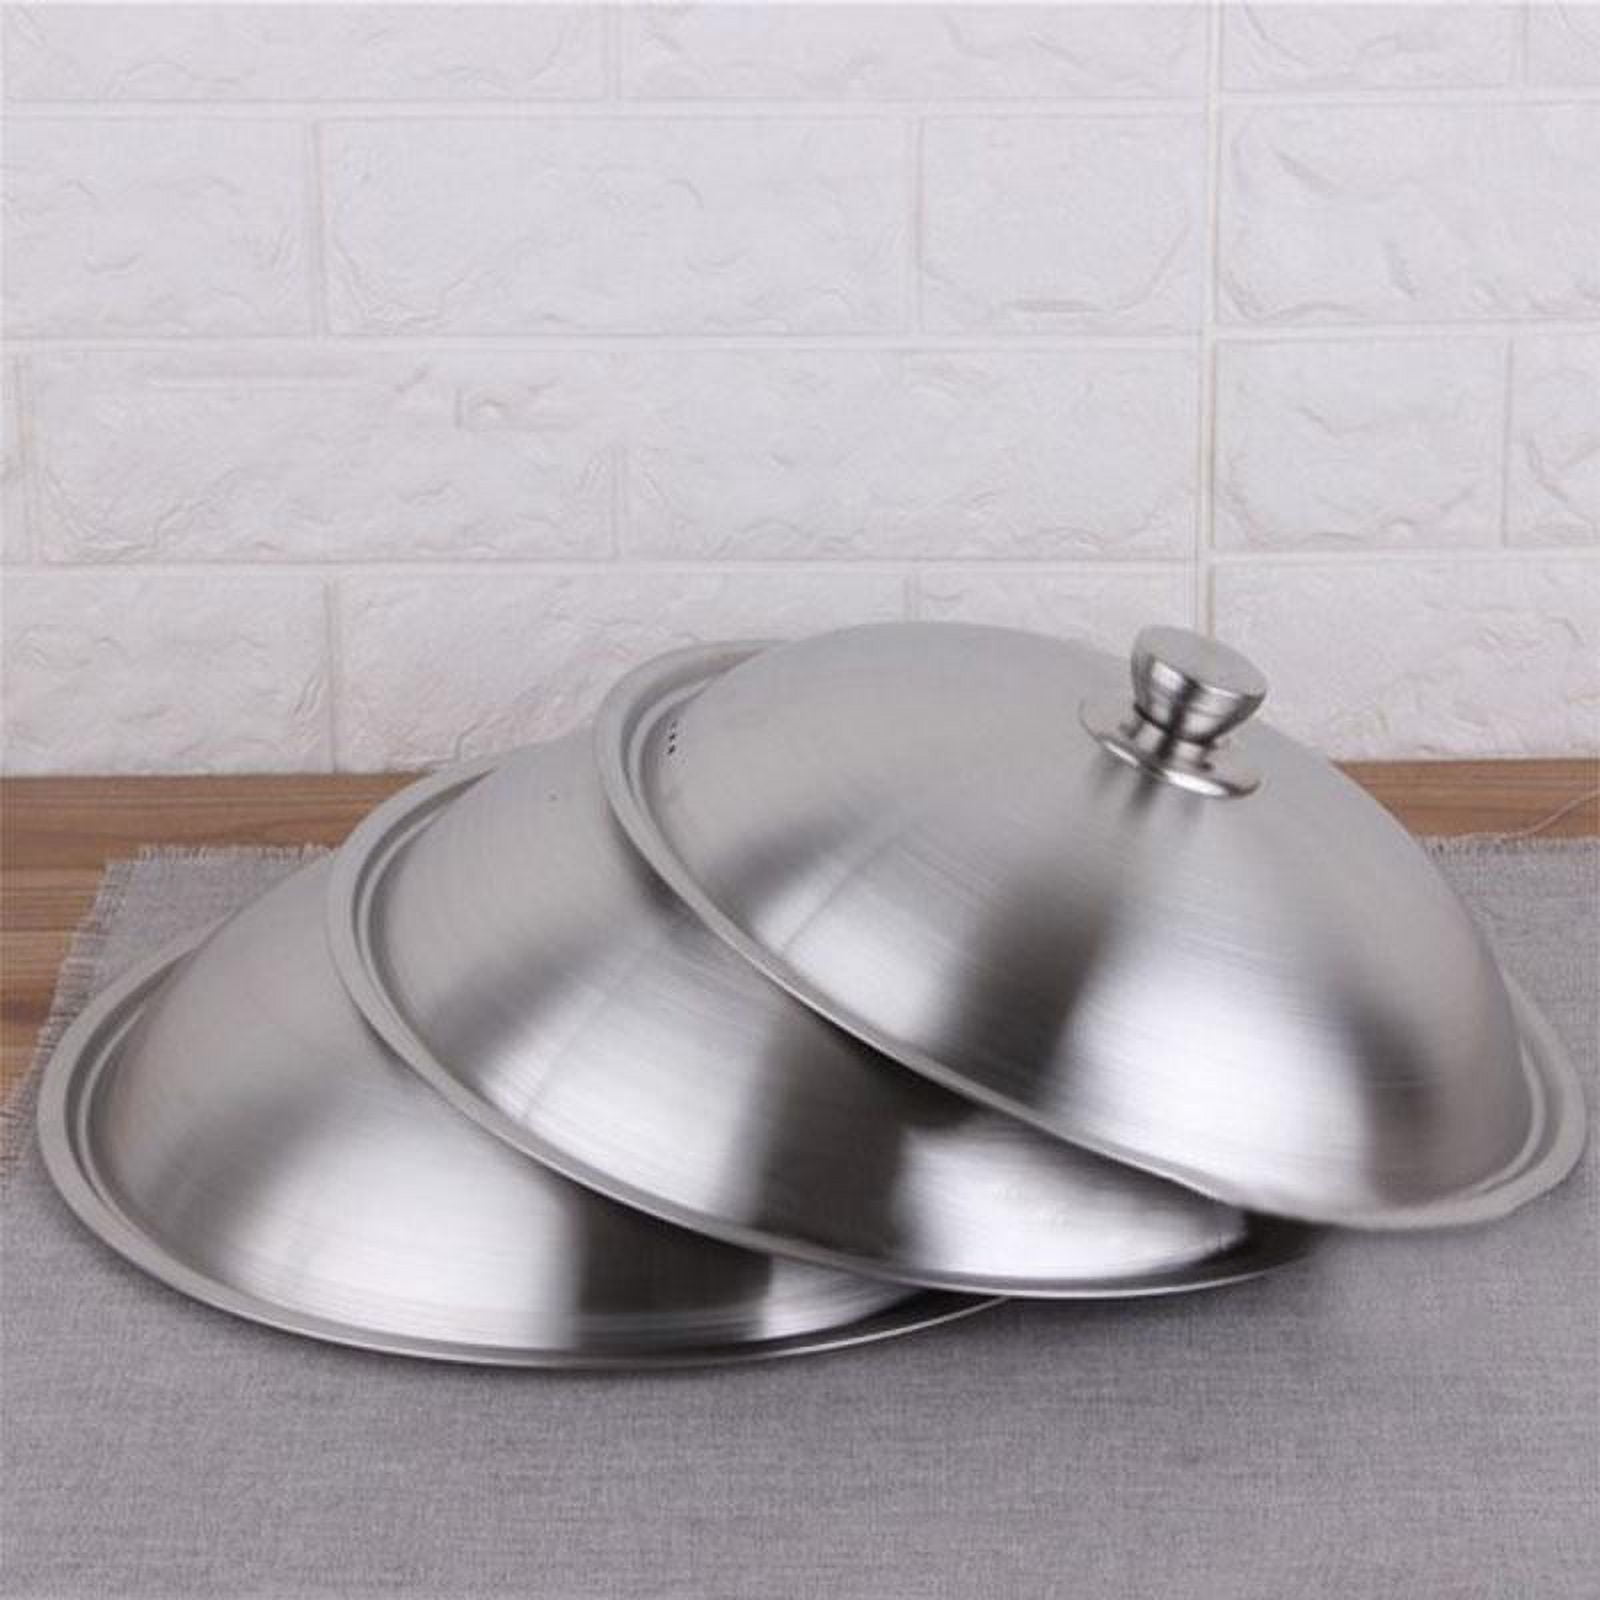  Cooking Pan Lid Stainless Steel Pot Lid Pans Skillets Round  Universal Lid for Pots and Pans ot Lids Cover Replacement Cookware Frying  Pan Cover and Cast Iron Skillet 29cm Pot Lid